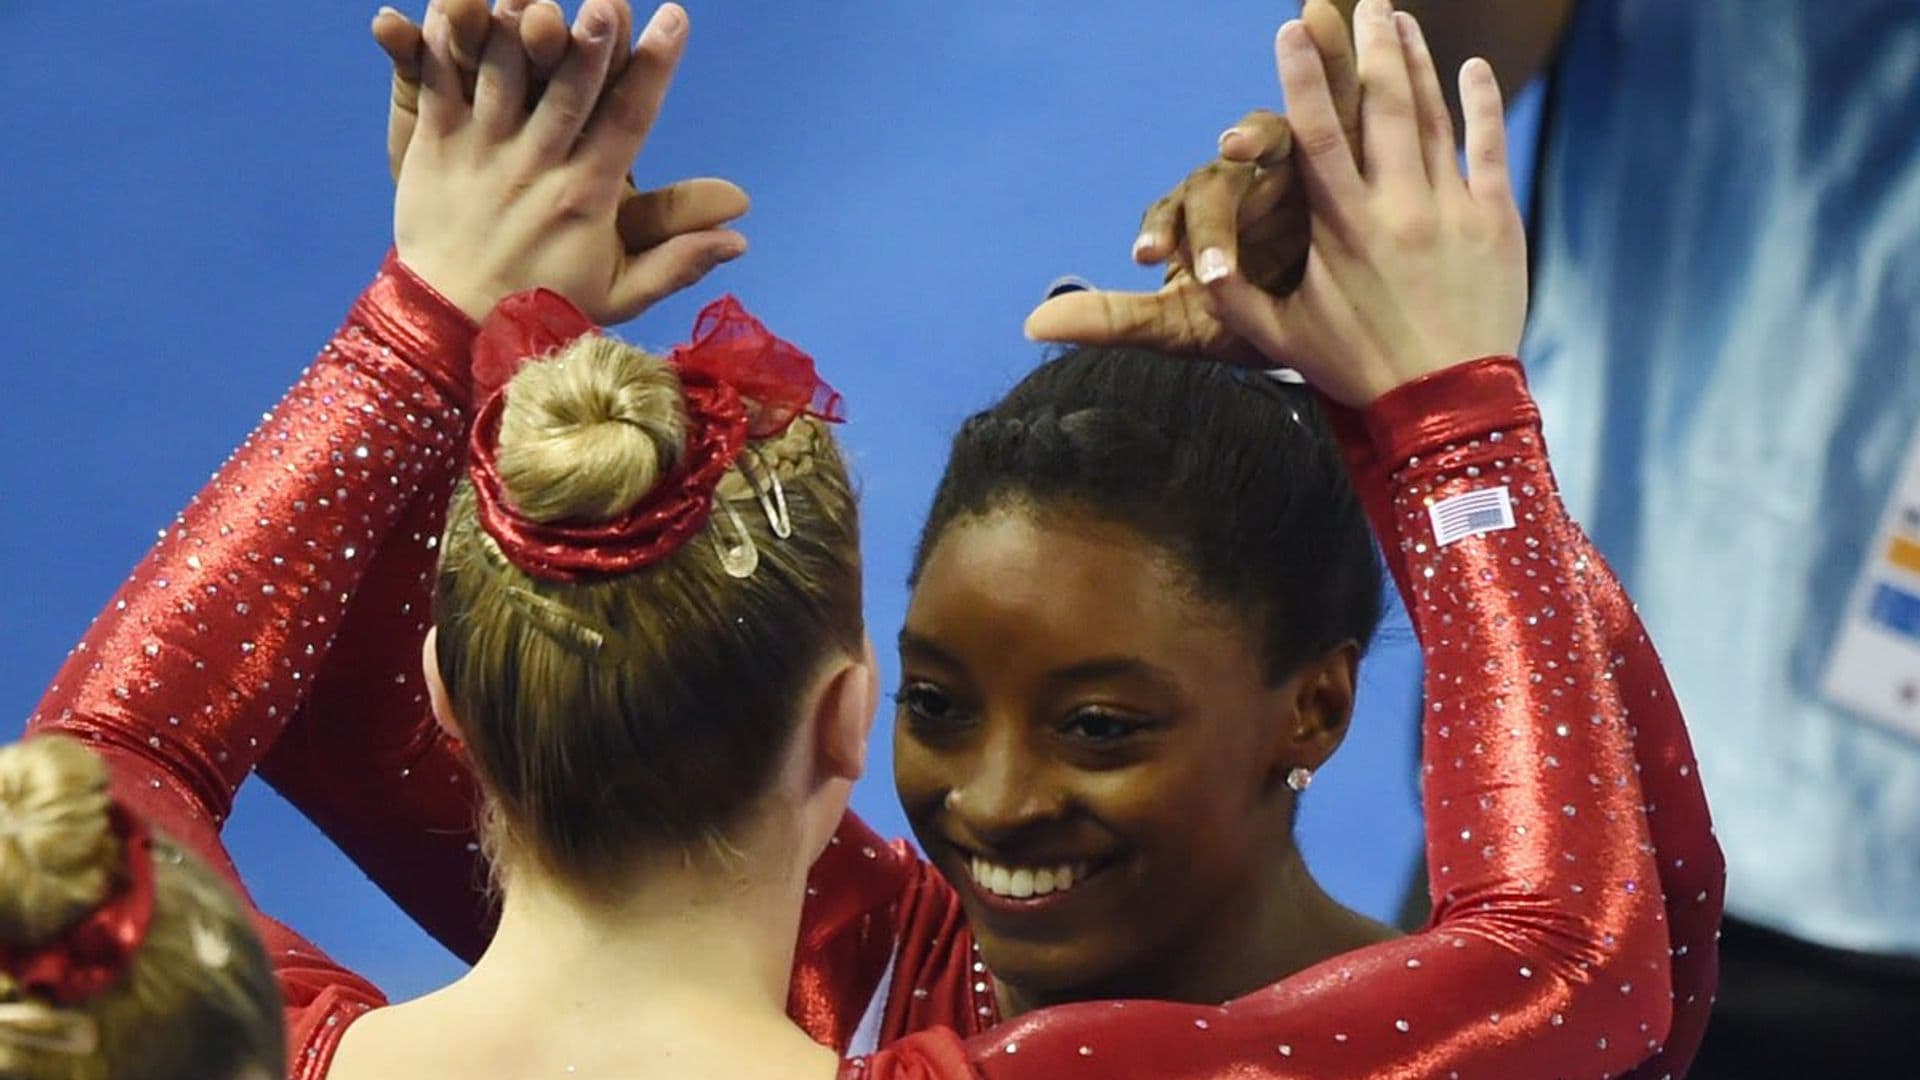 Welcome to Tokyo! Simone Biles and MyKayla Skinner landed in Japan for the Olympics